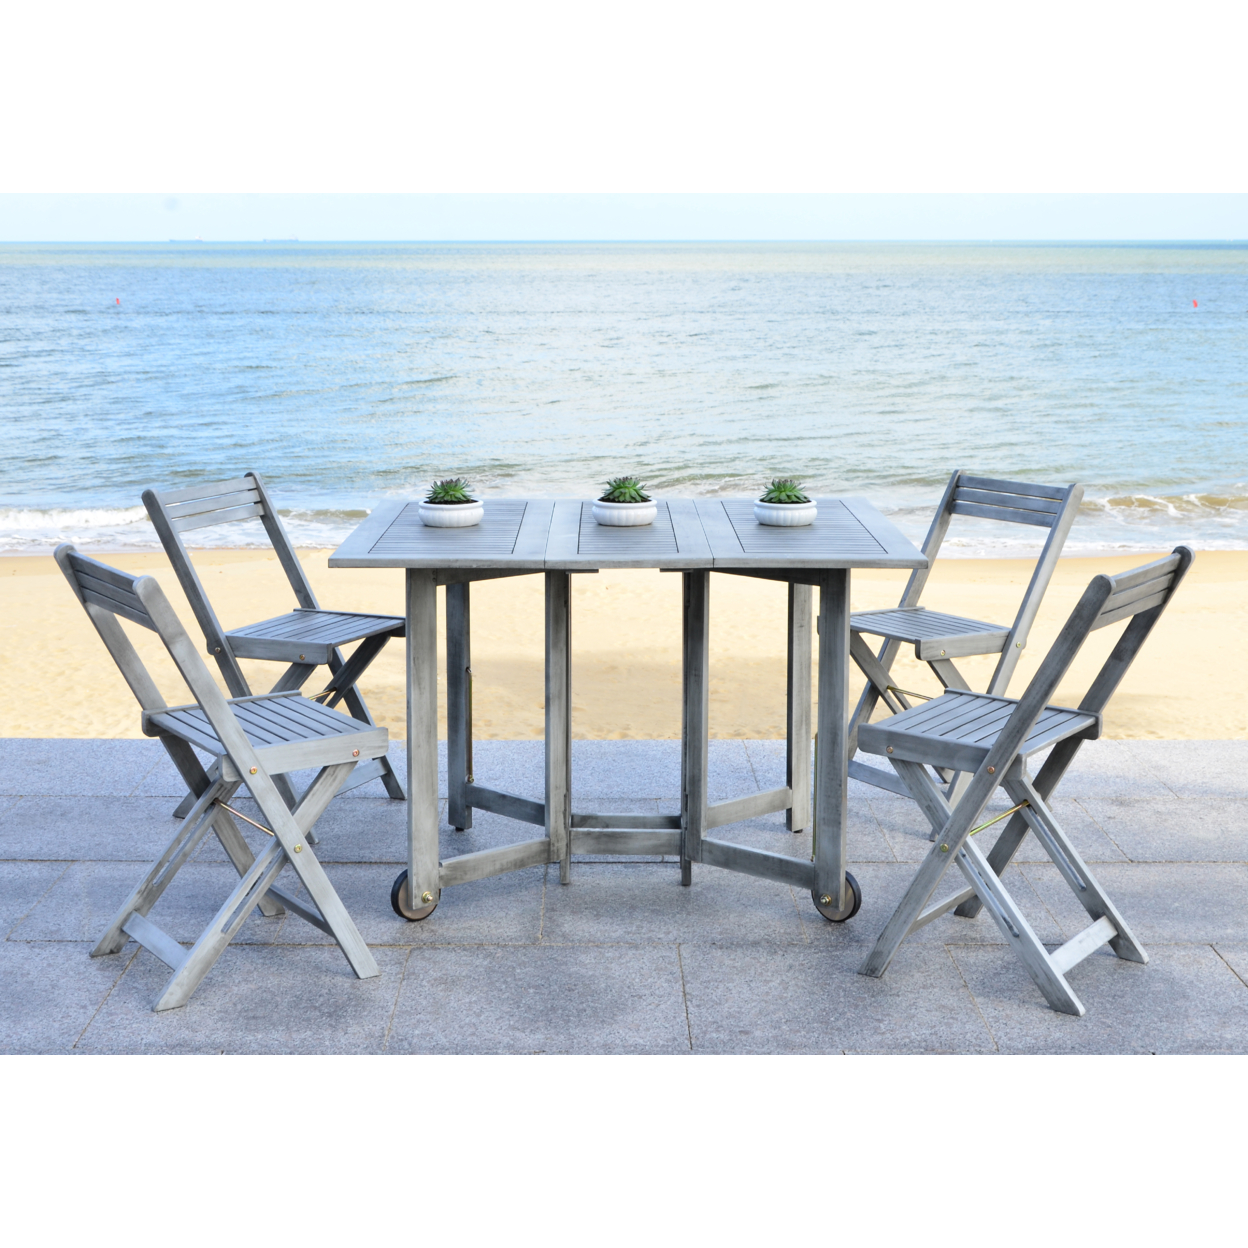 SAFAVIEH Outdoor Collection Arvin Table & 4 Chairs Grey Wash